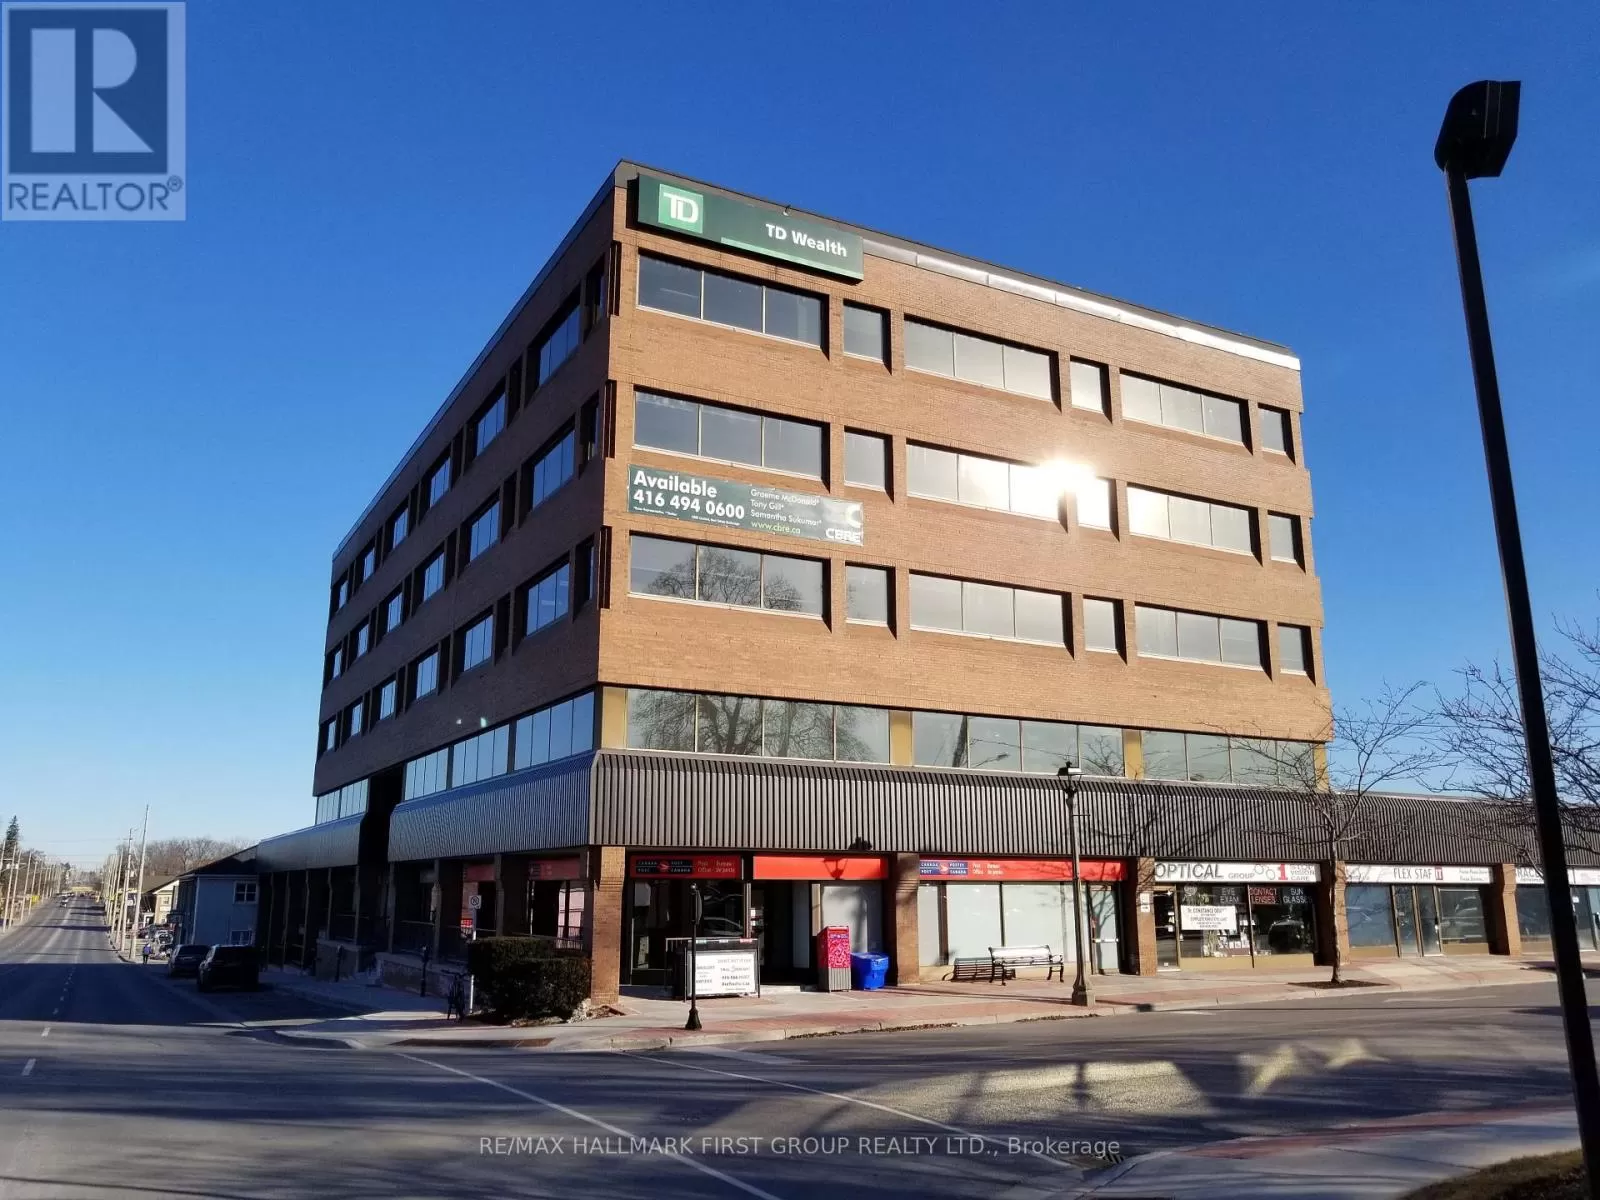 Offices for rent: 403 - 209 Dundas Street E, Whitby, Ontario L1N 7H8